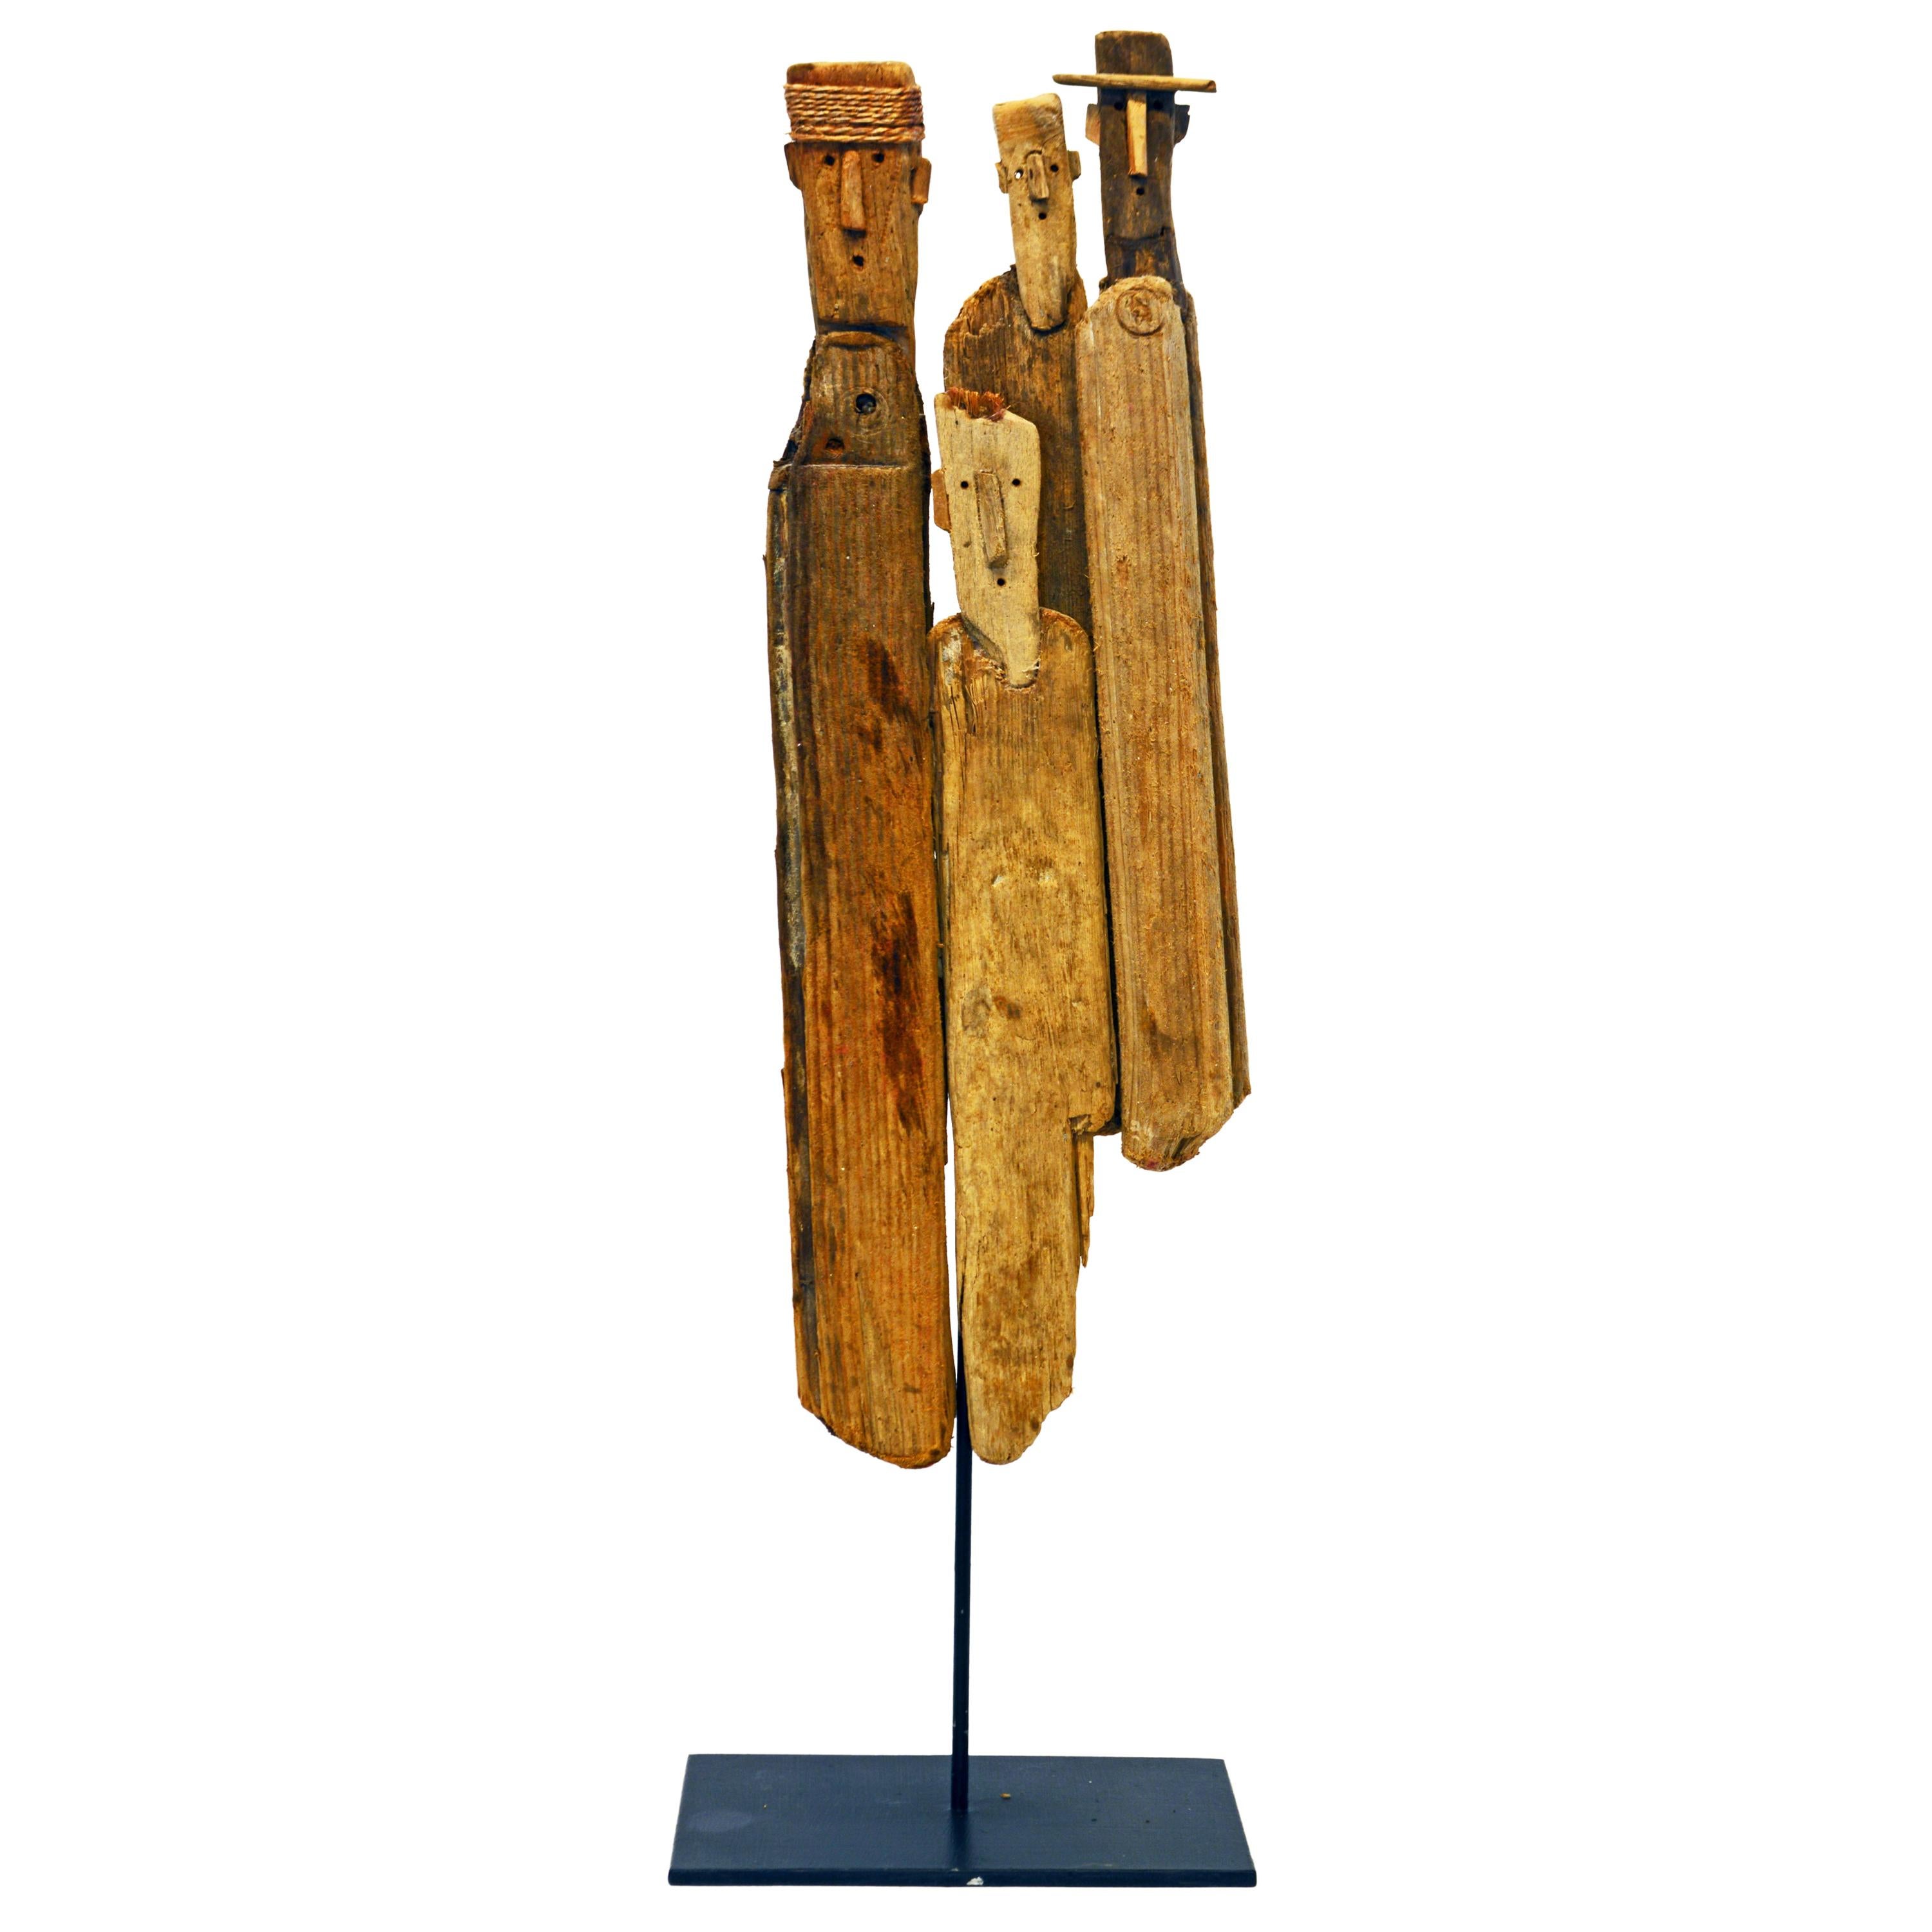 Driftwood Sculpture of Four Expressive Figures by Marc Bourlier, French B. 1947